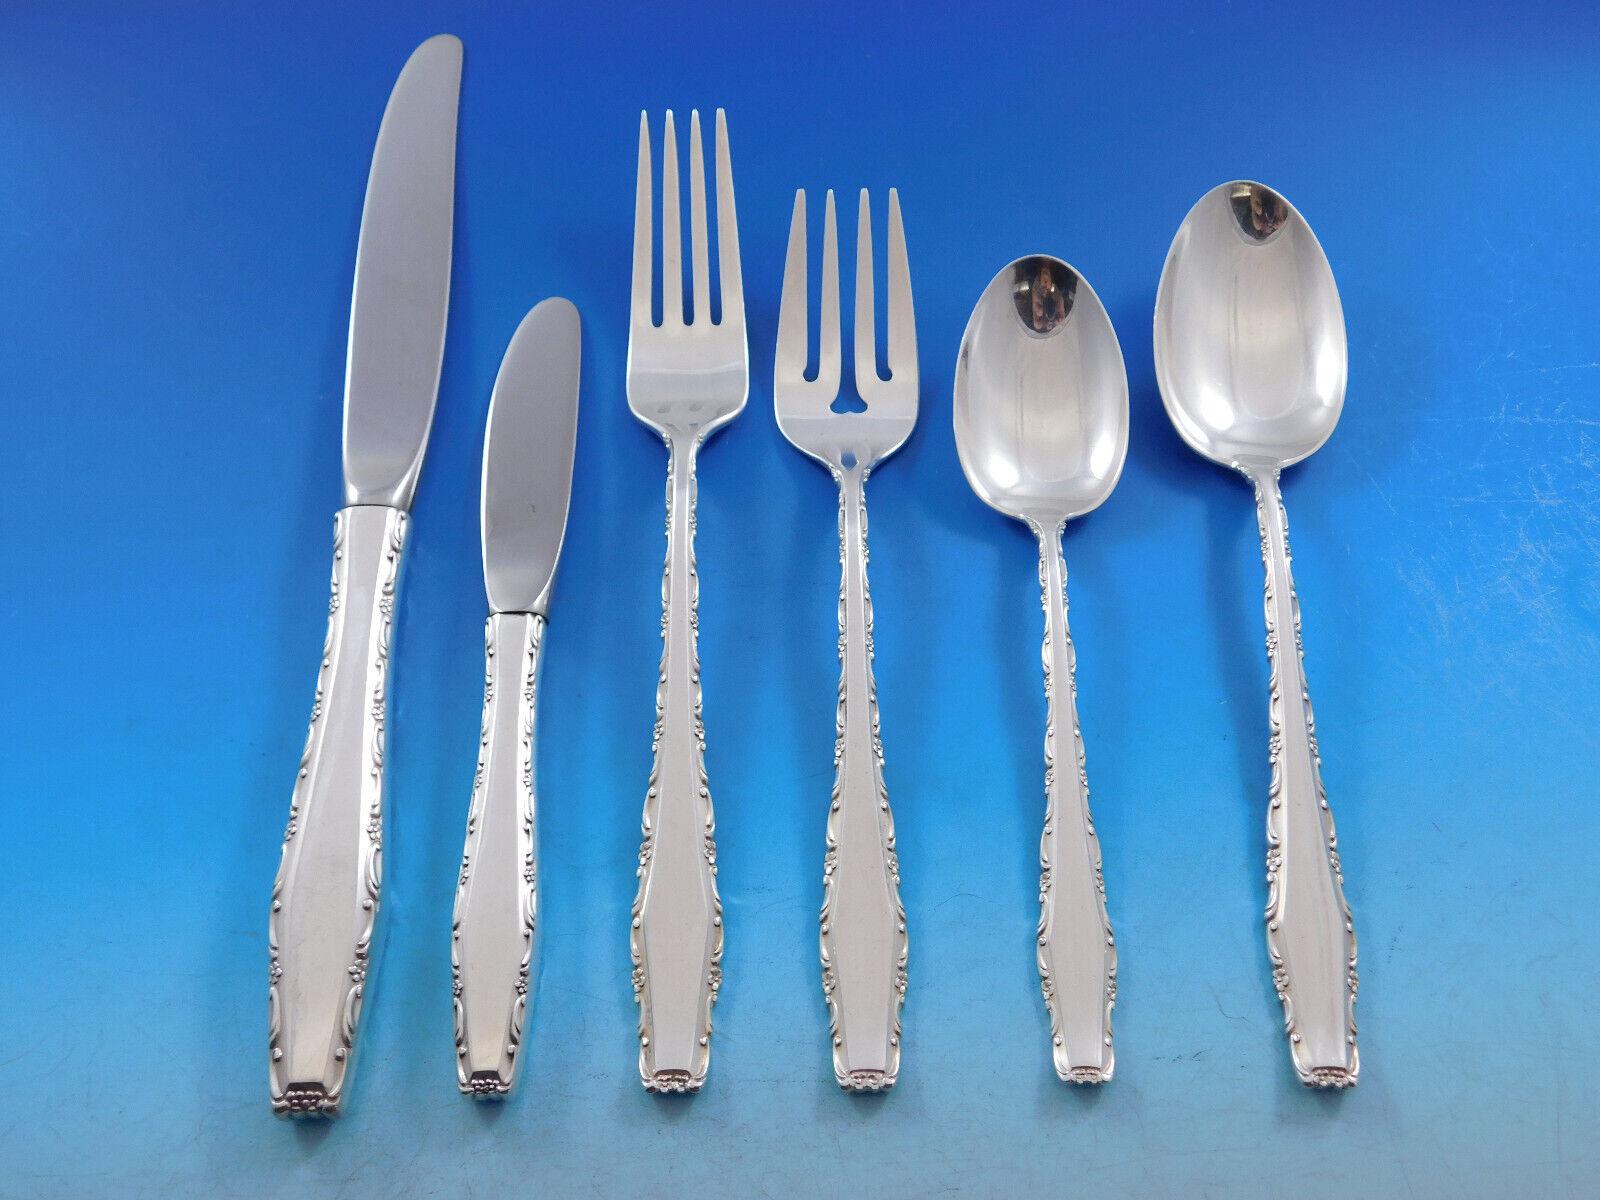 Rapallo by Lunt sterling silver Flatware set - 77 pieces. This set includes:
12 Knives, 9